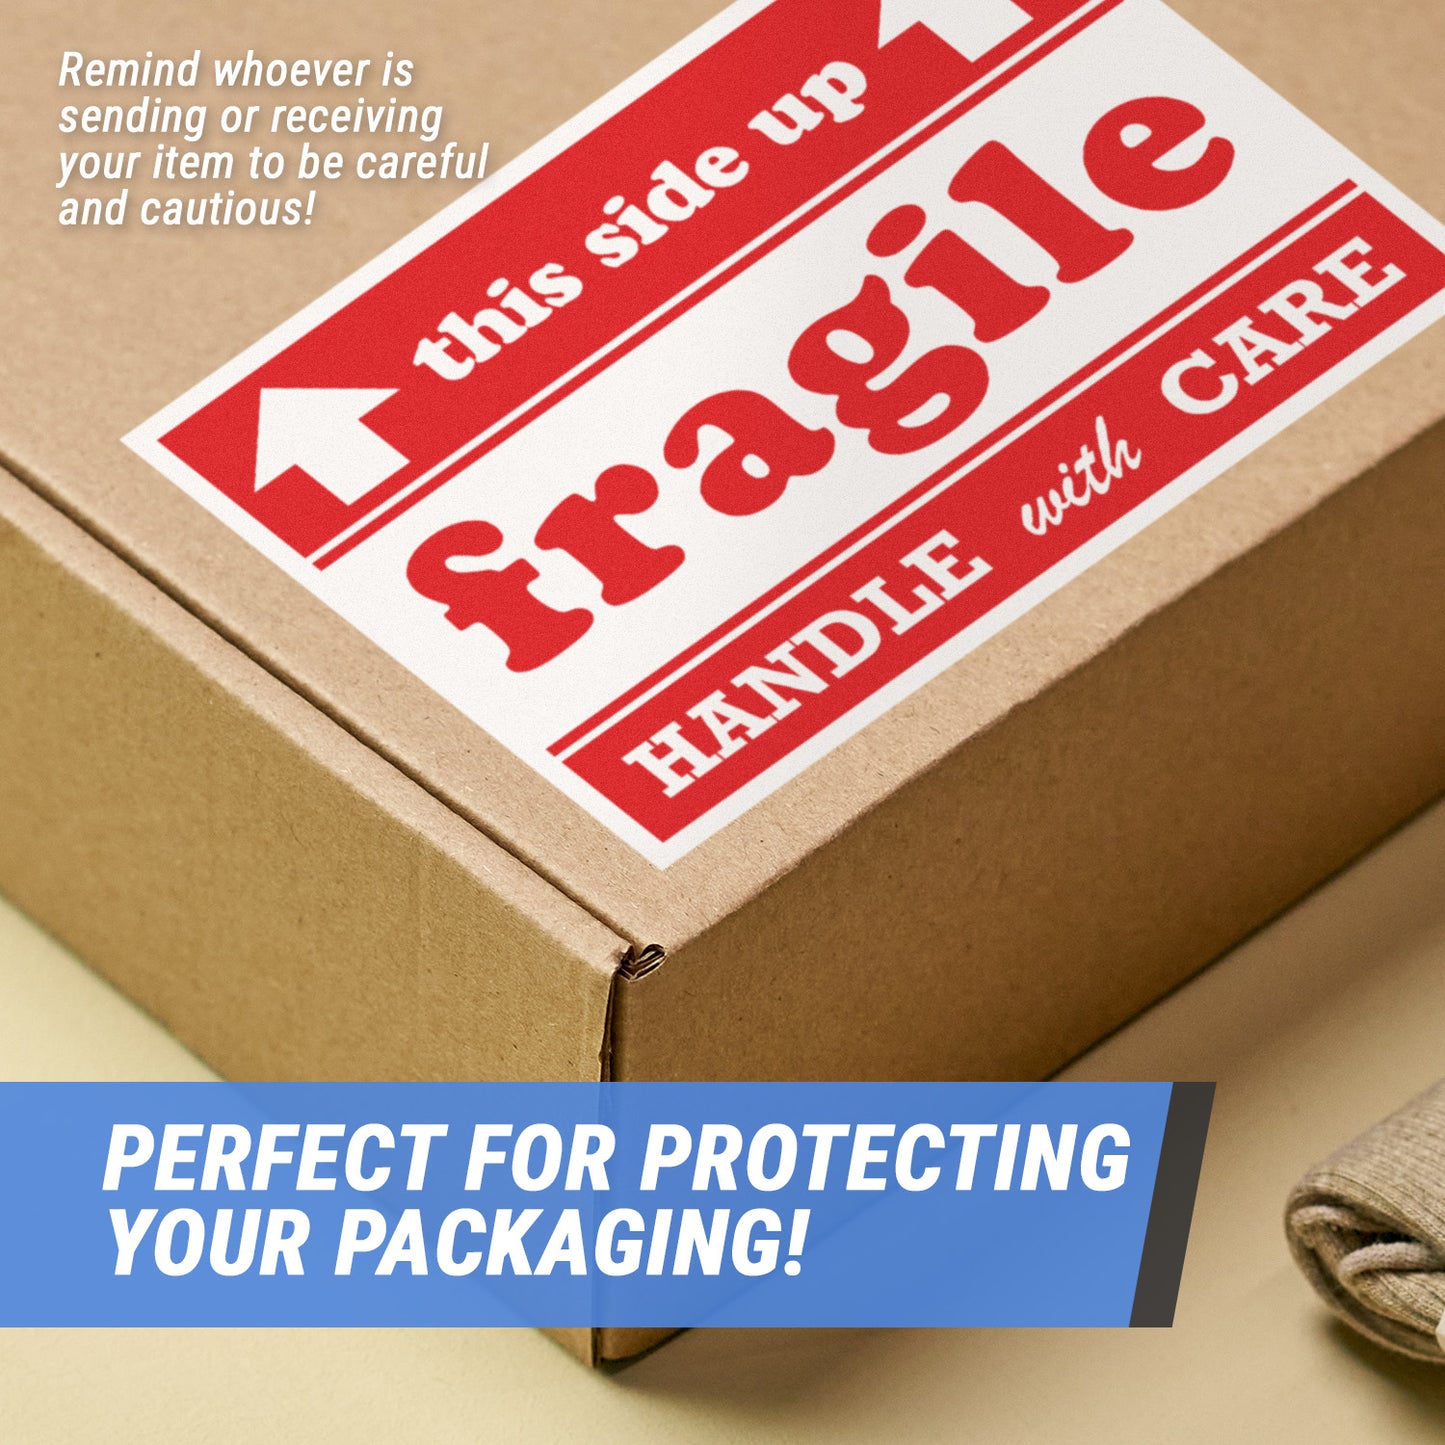 6 x 4 inch | Shipping & Handling: Fragile Handle With Care Stickers / This Side Up Stickers